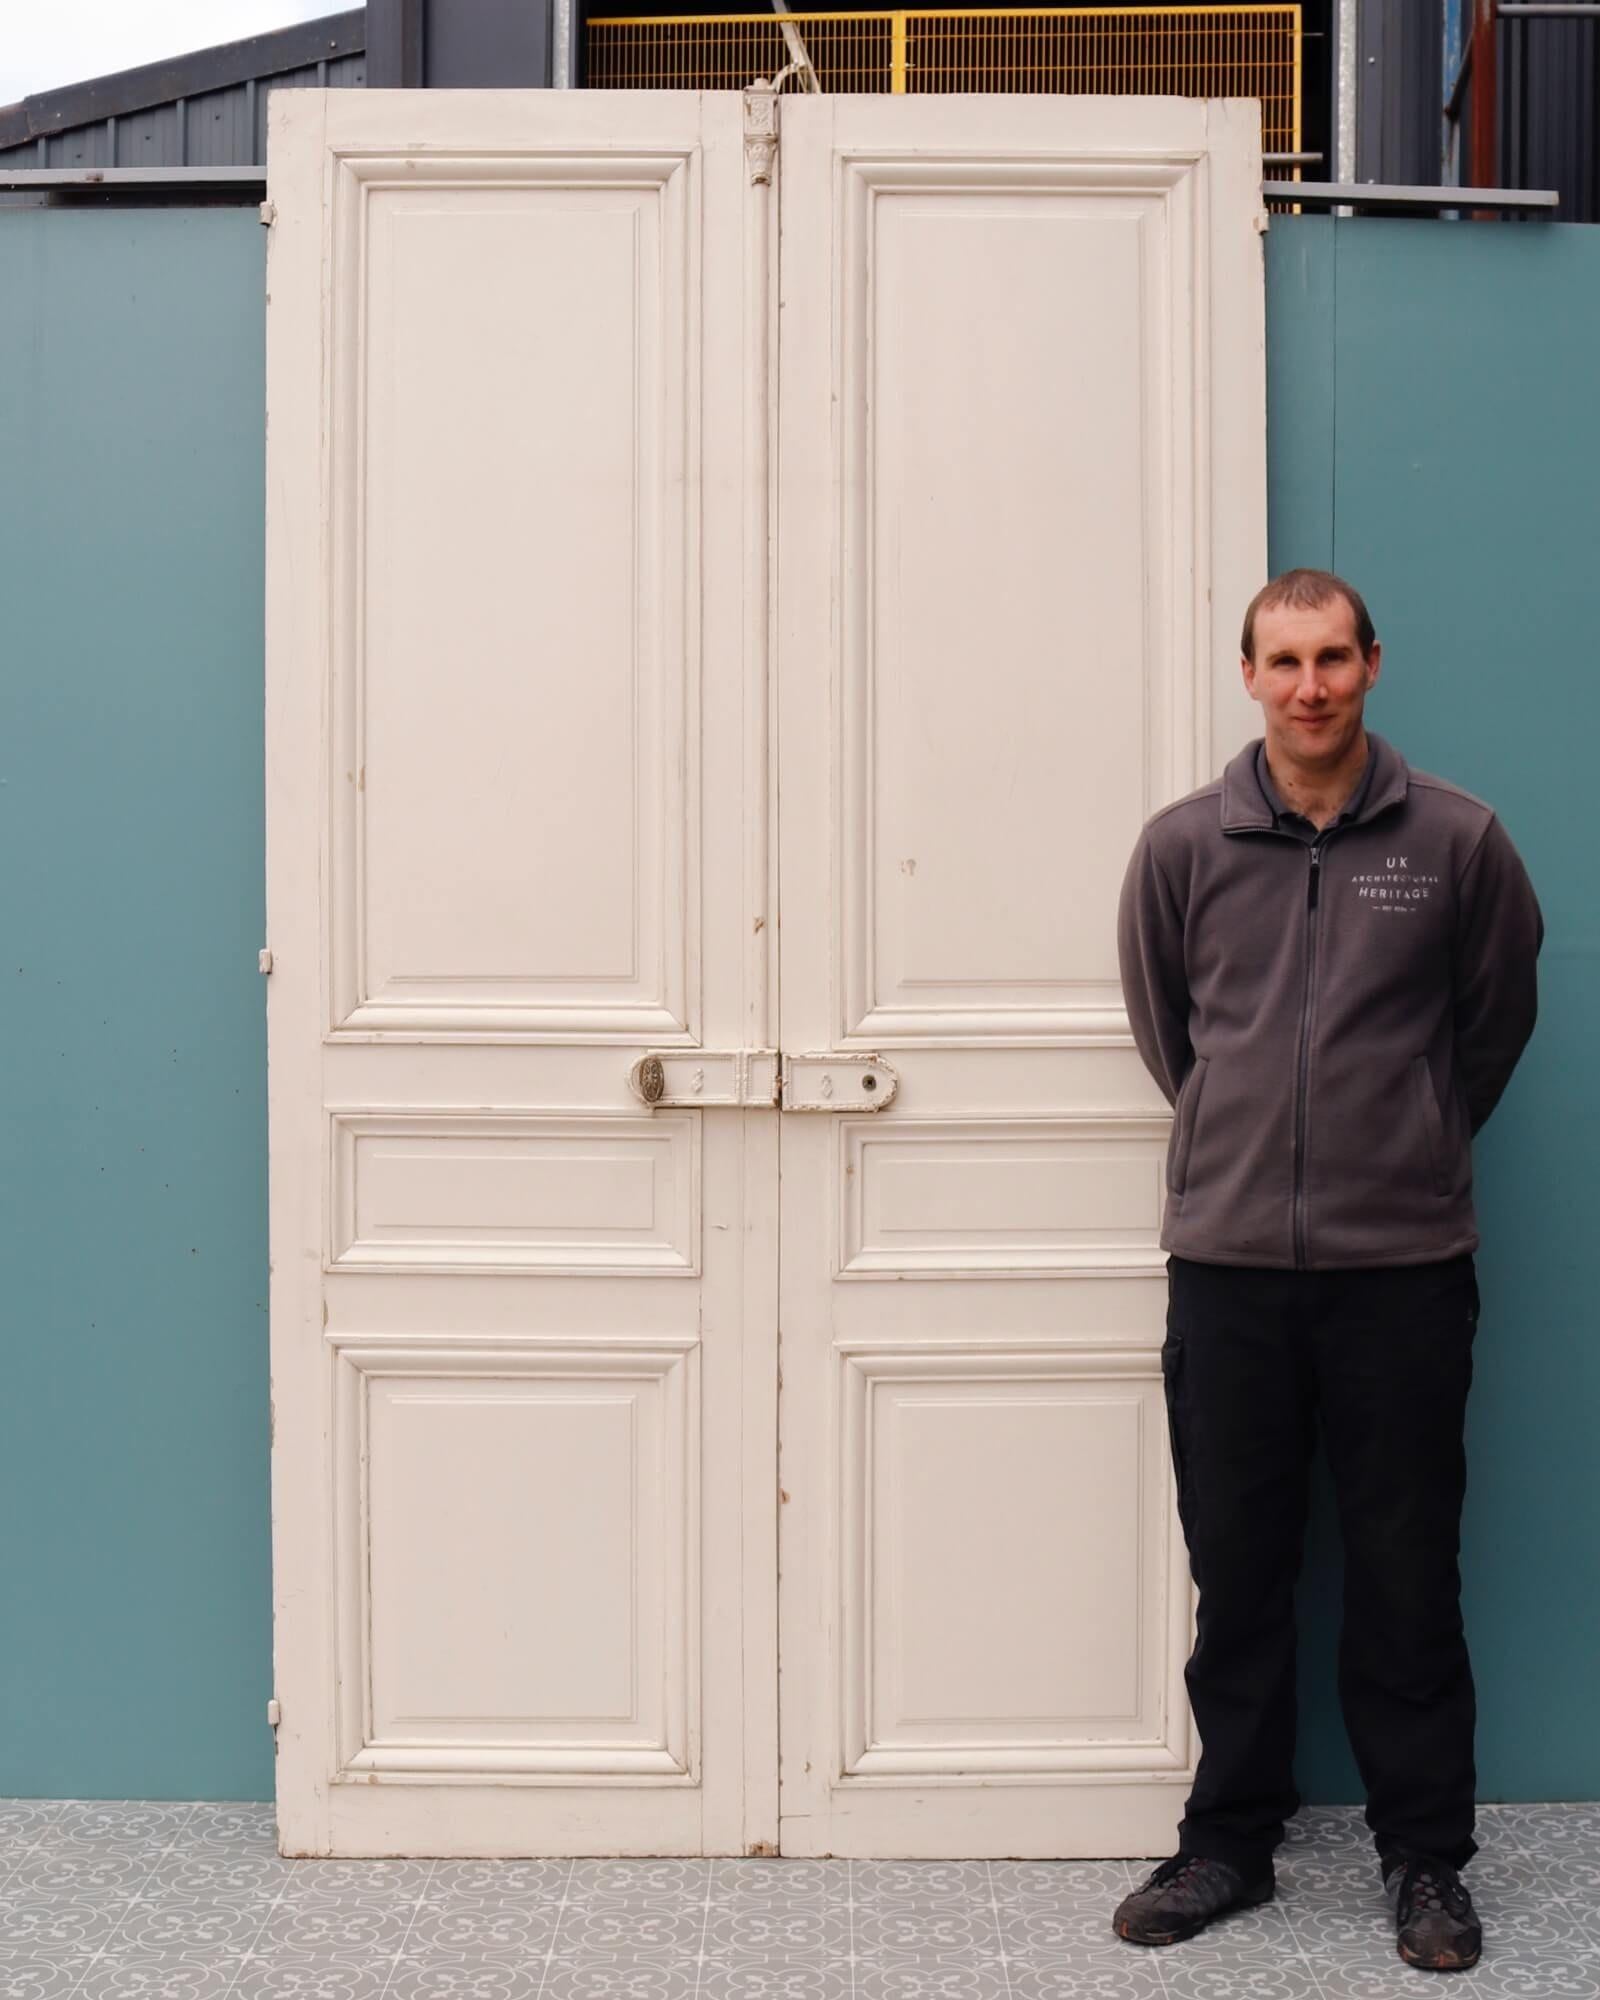 These tall Louis XVI style antique double doors are one of various sets reclaimed from the American Embassy in Paris.

Dating from circa 1870, these antique doors are generous in size, showcasing the grandeur and opulence of 19th century French